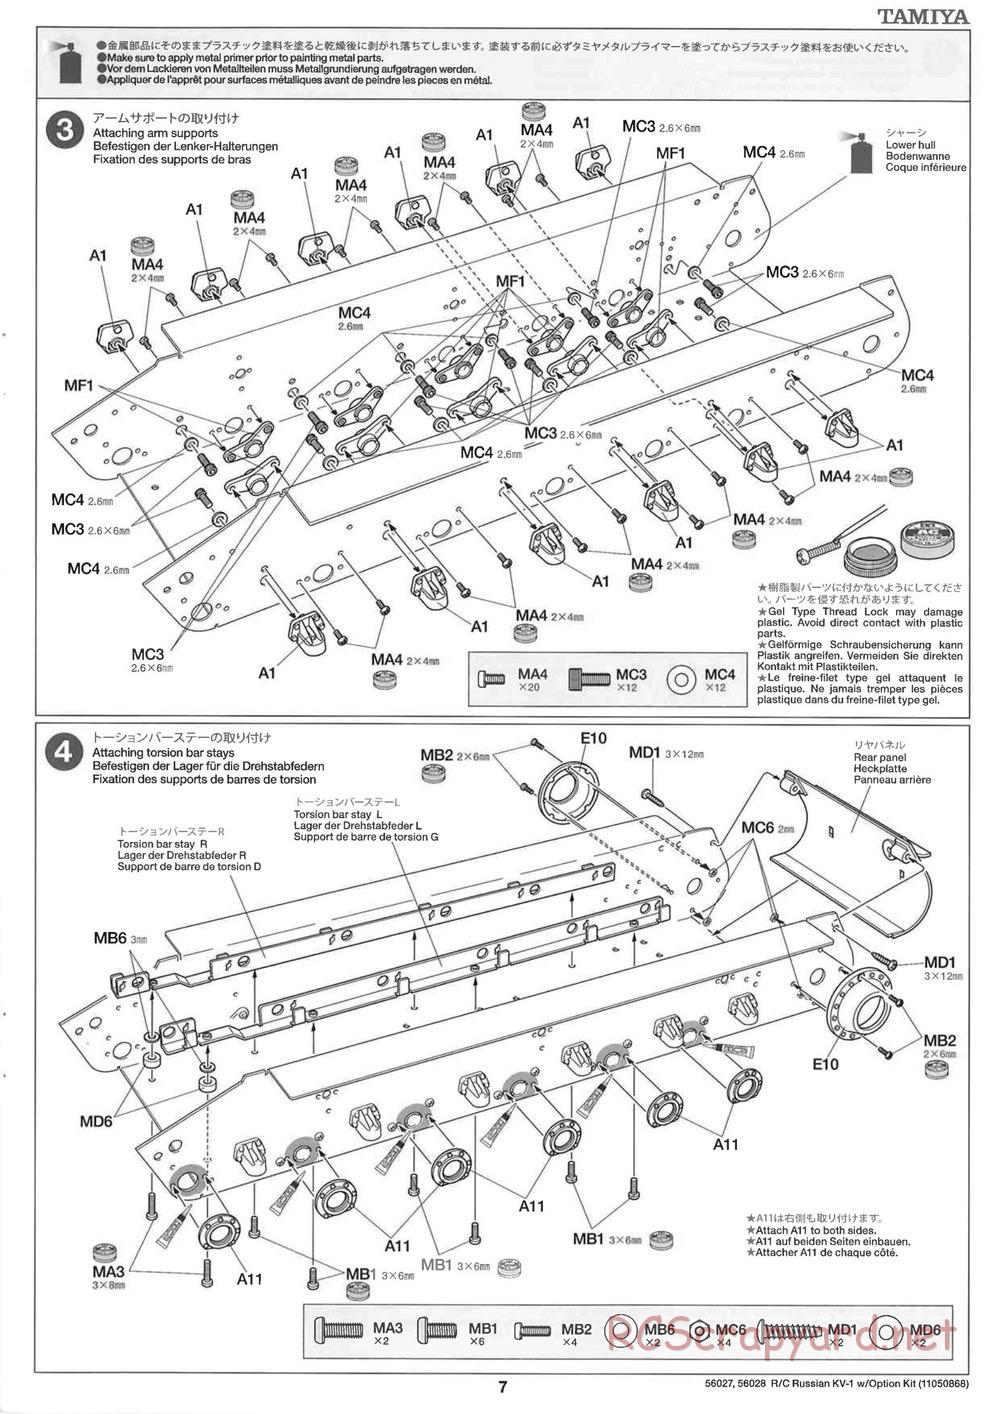 Tamiya - Russian Heavy Tank KV-1 - 1/16 Scale Chassis - Manual - Page 7